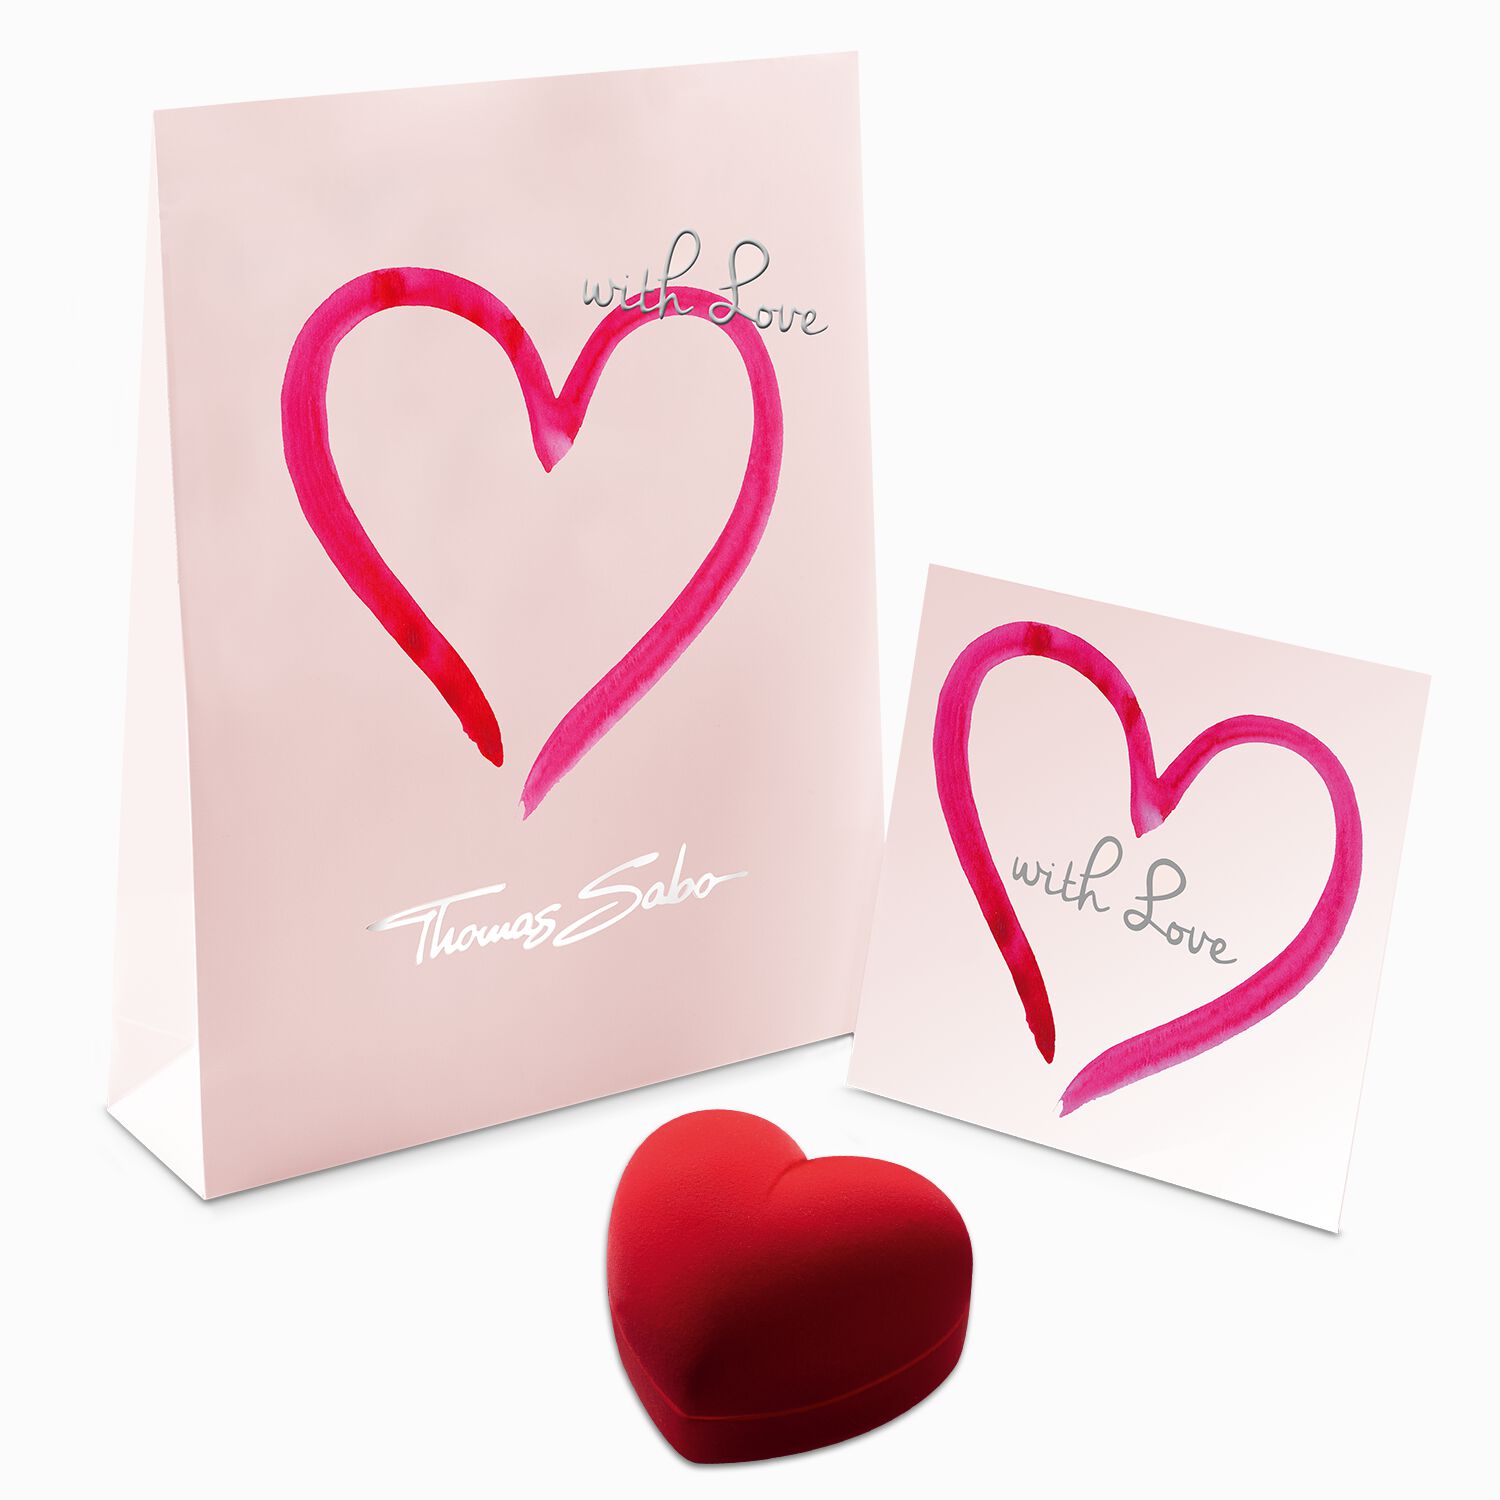 Heart gift set from the  collection in the THOMAS SABO online store